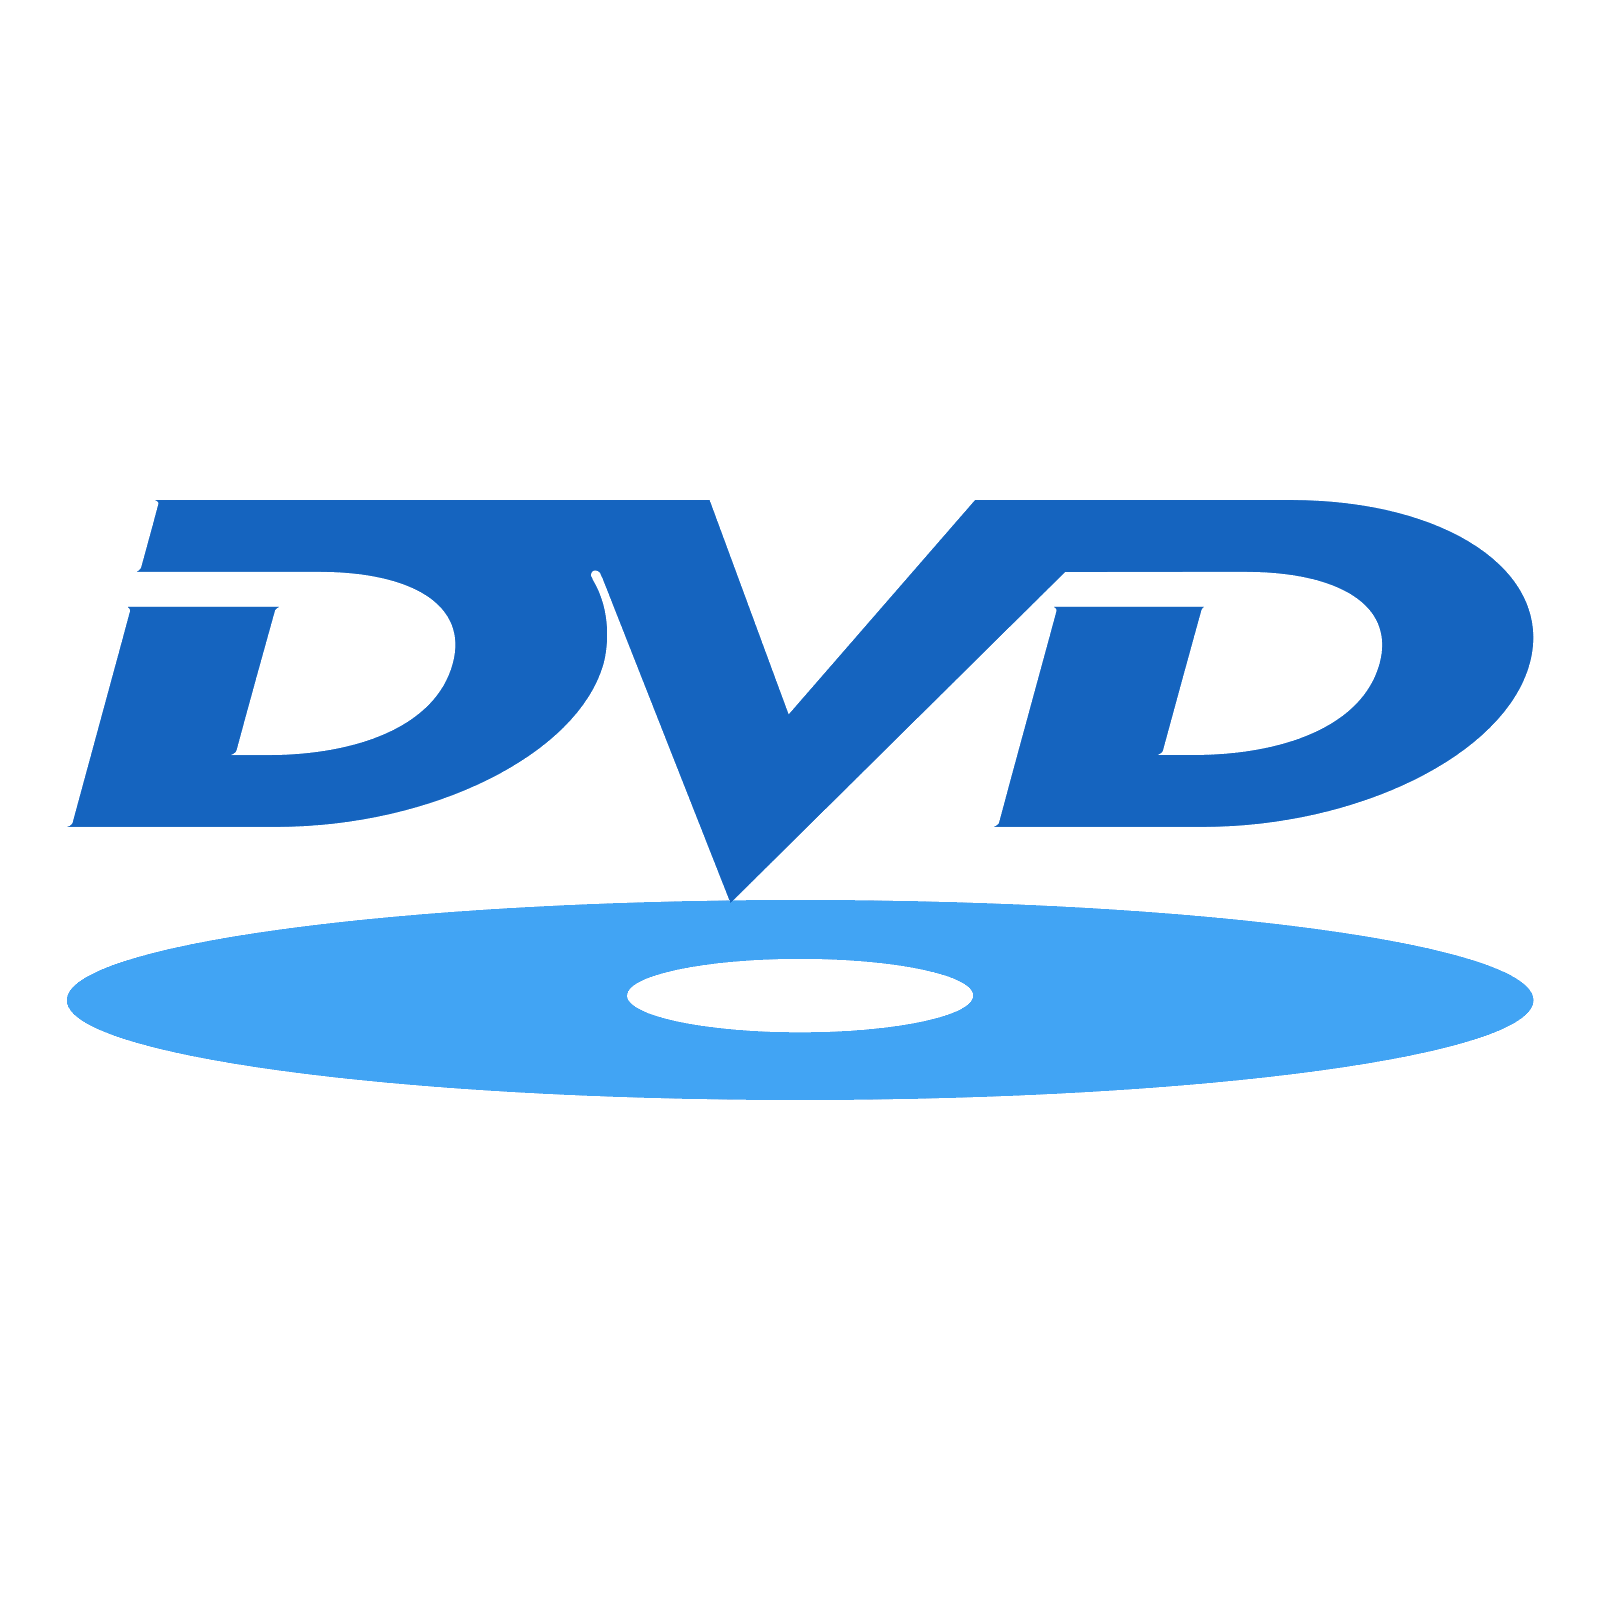 Dvd icon | Icon search engine